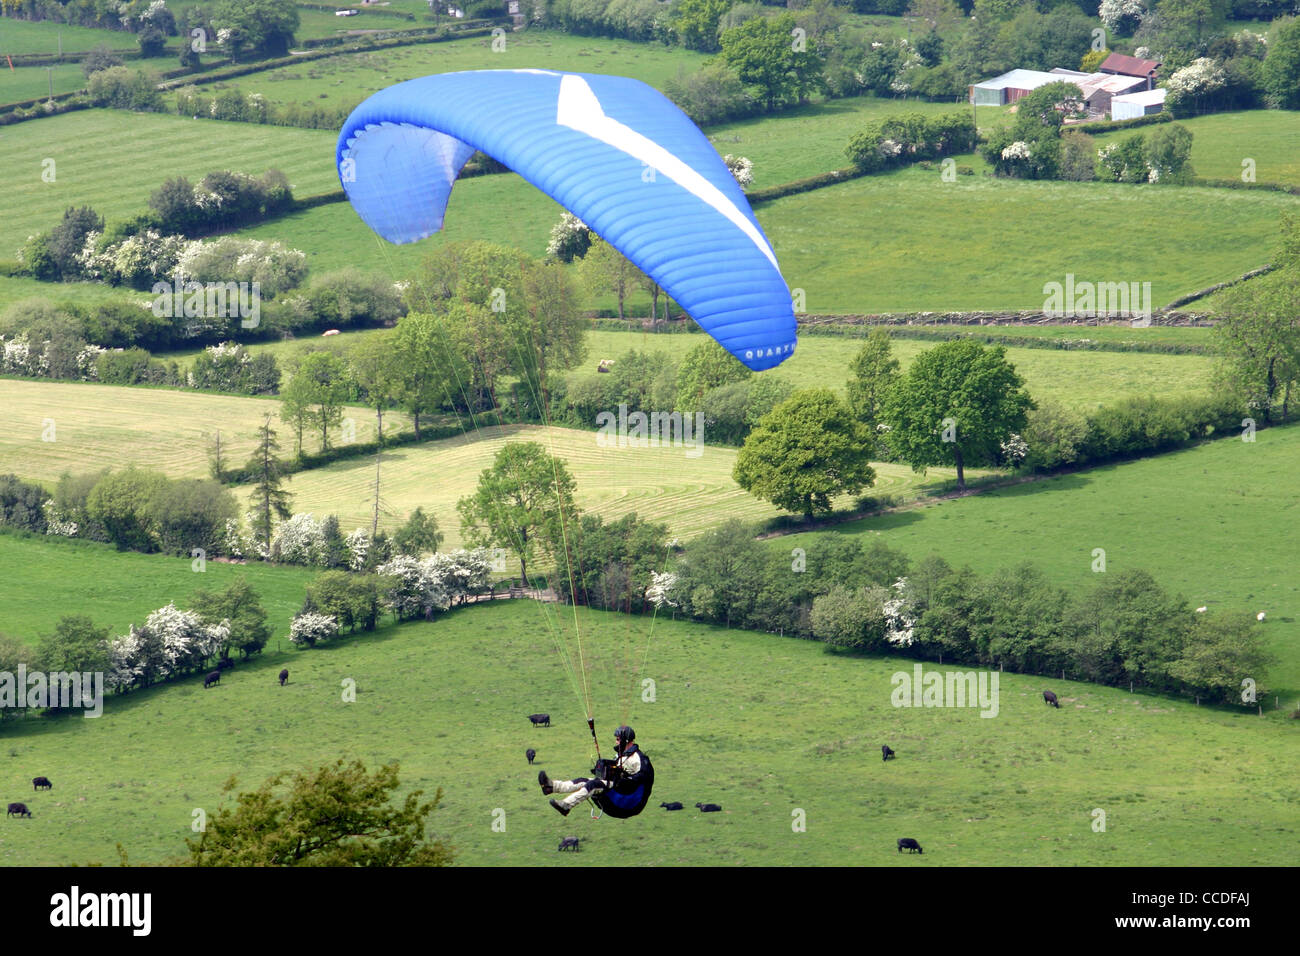 Hangglider from above Stock Photo